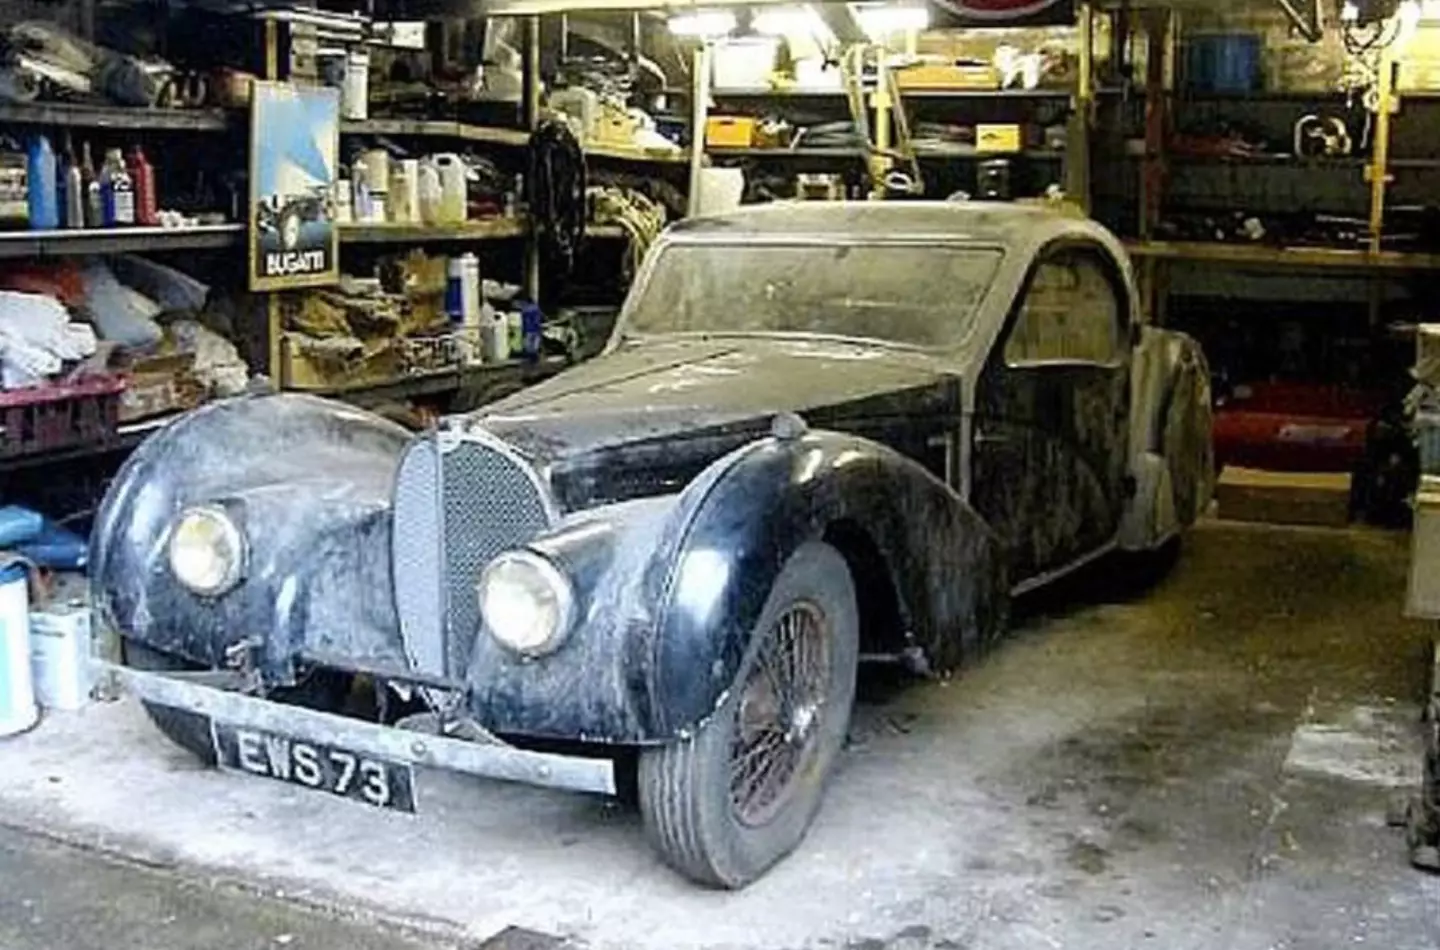 The 1937 Bugatti Type 57S was an extremely rare car.